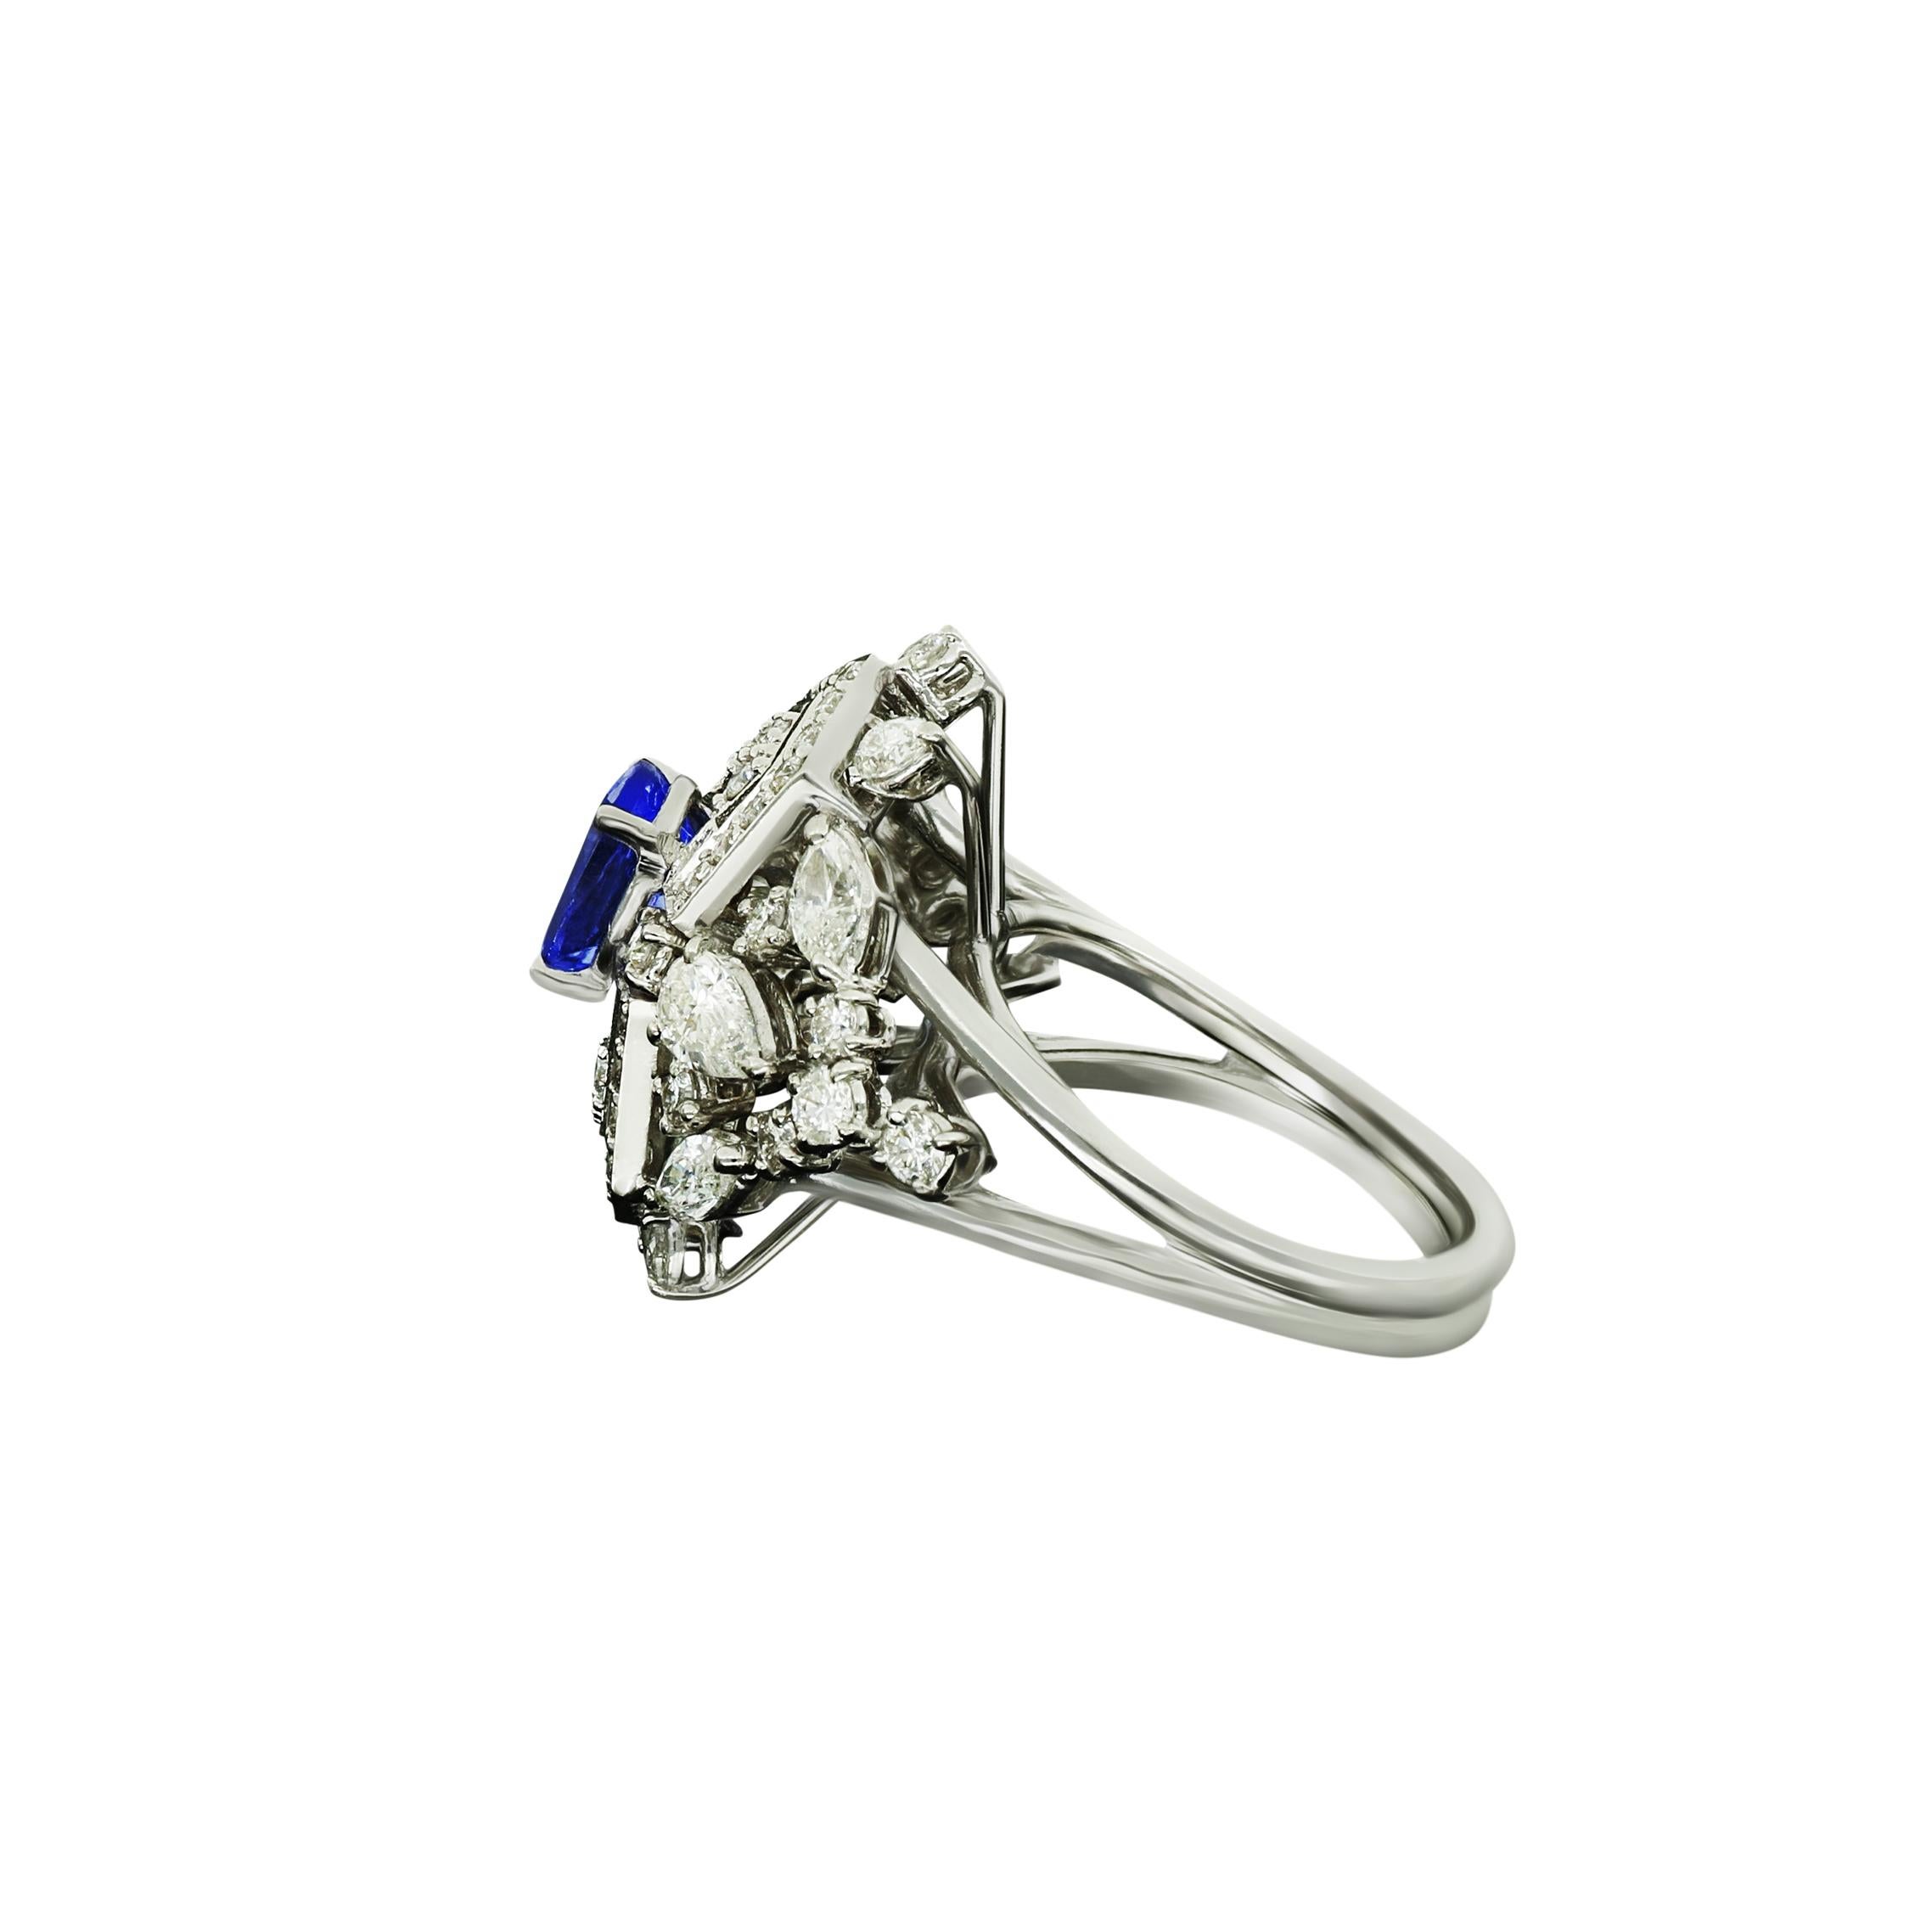 This 18K white gold ring by Amwaj jewellery features seemingly random arrangements of pear and round cut white diamonds which magnify the vibrant beauty of the 1.41ct oval tanzanite stone.
Diamonds (Total Carat Weight: 2.16 ct)
18 Karat White